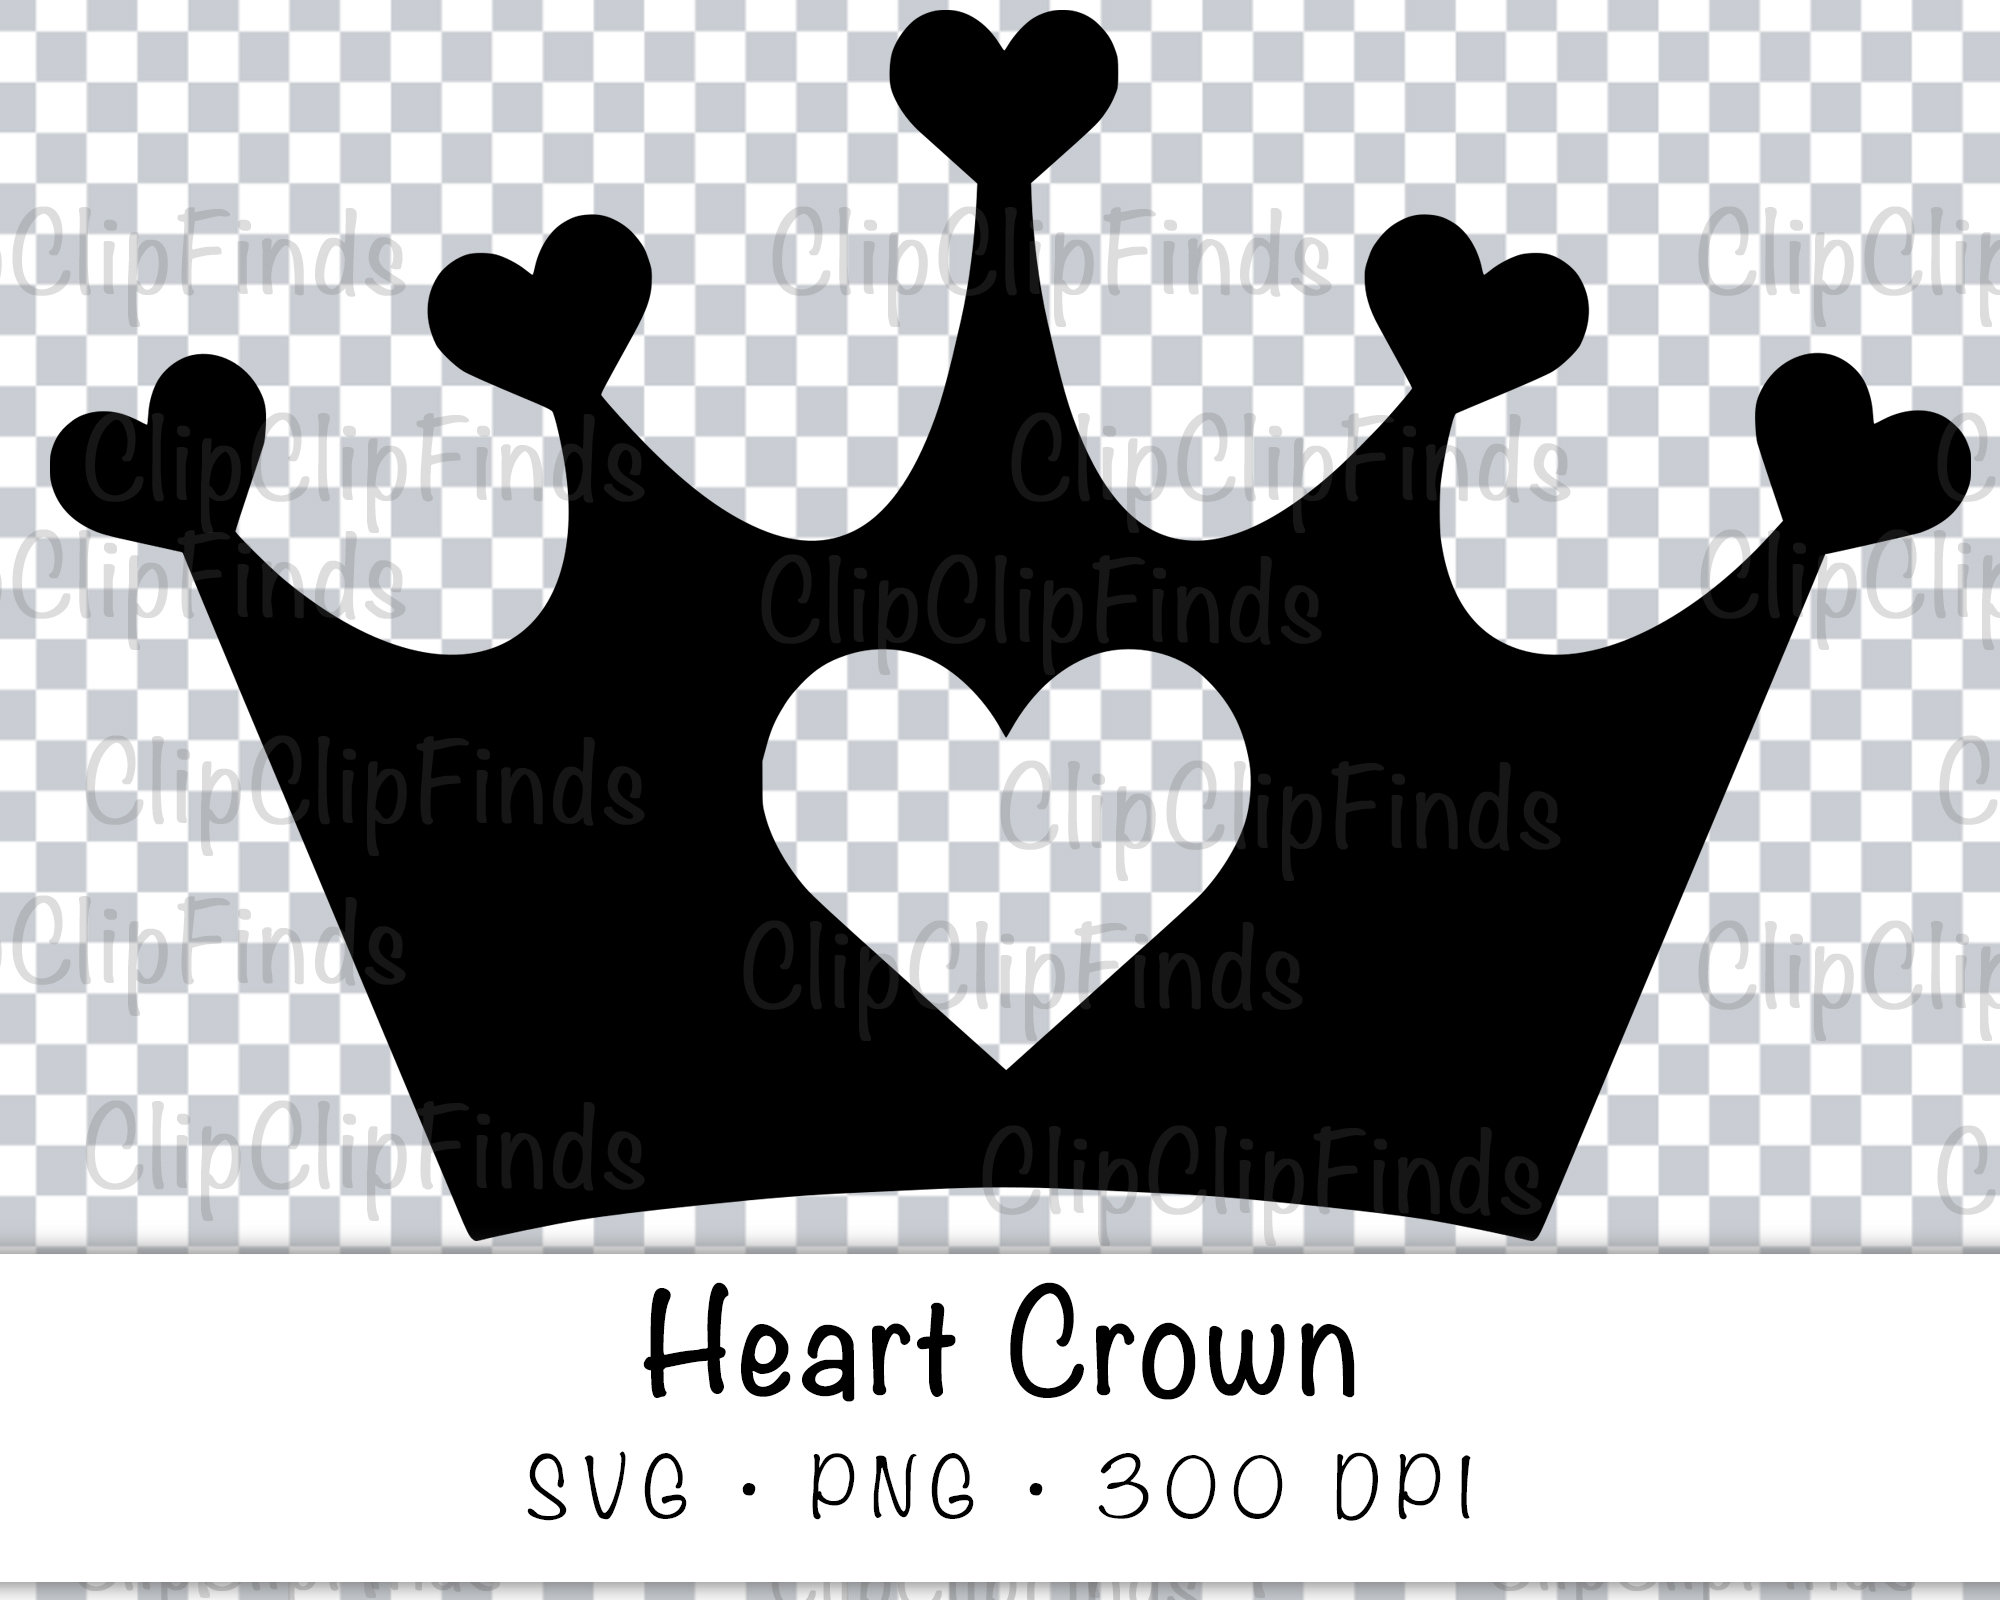 Heart Queen Crown SVG Vector Cut File and PNG Transparent | Etsy